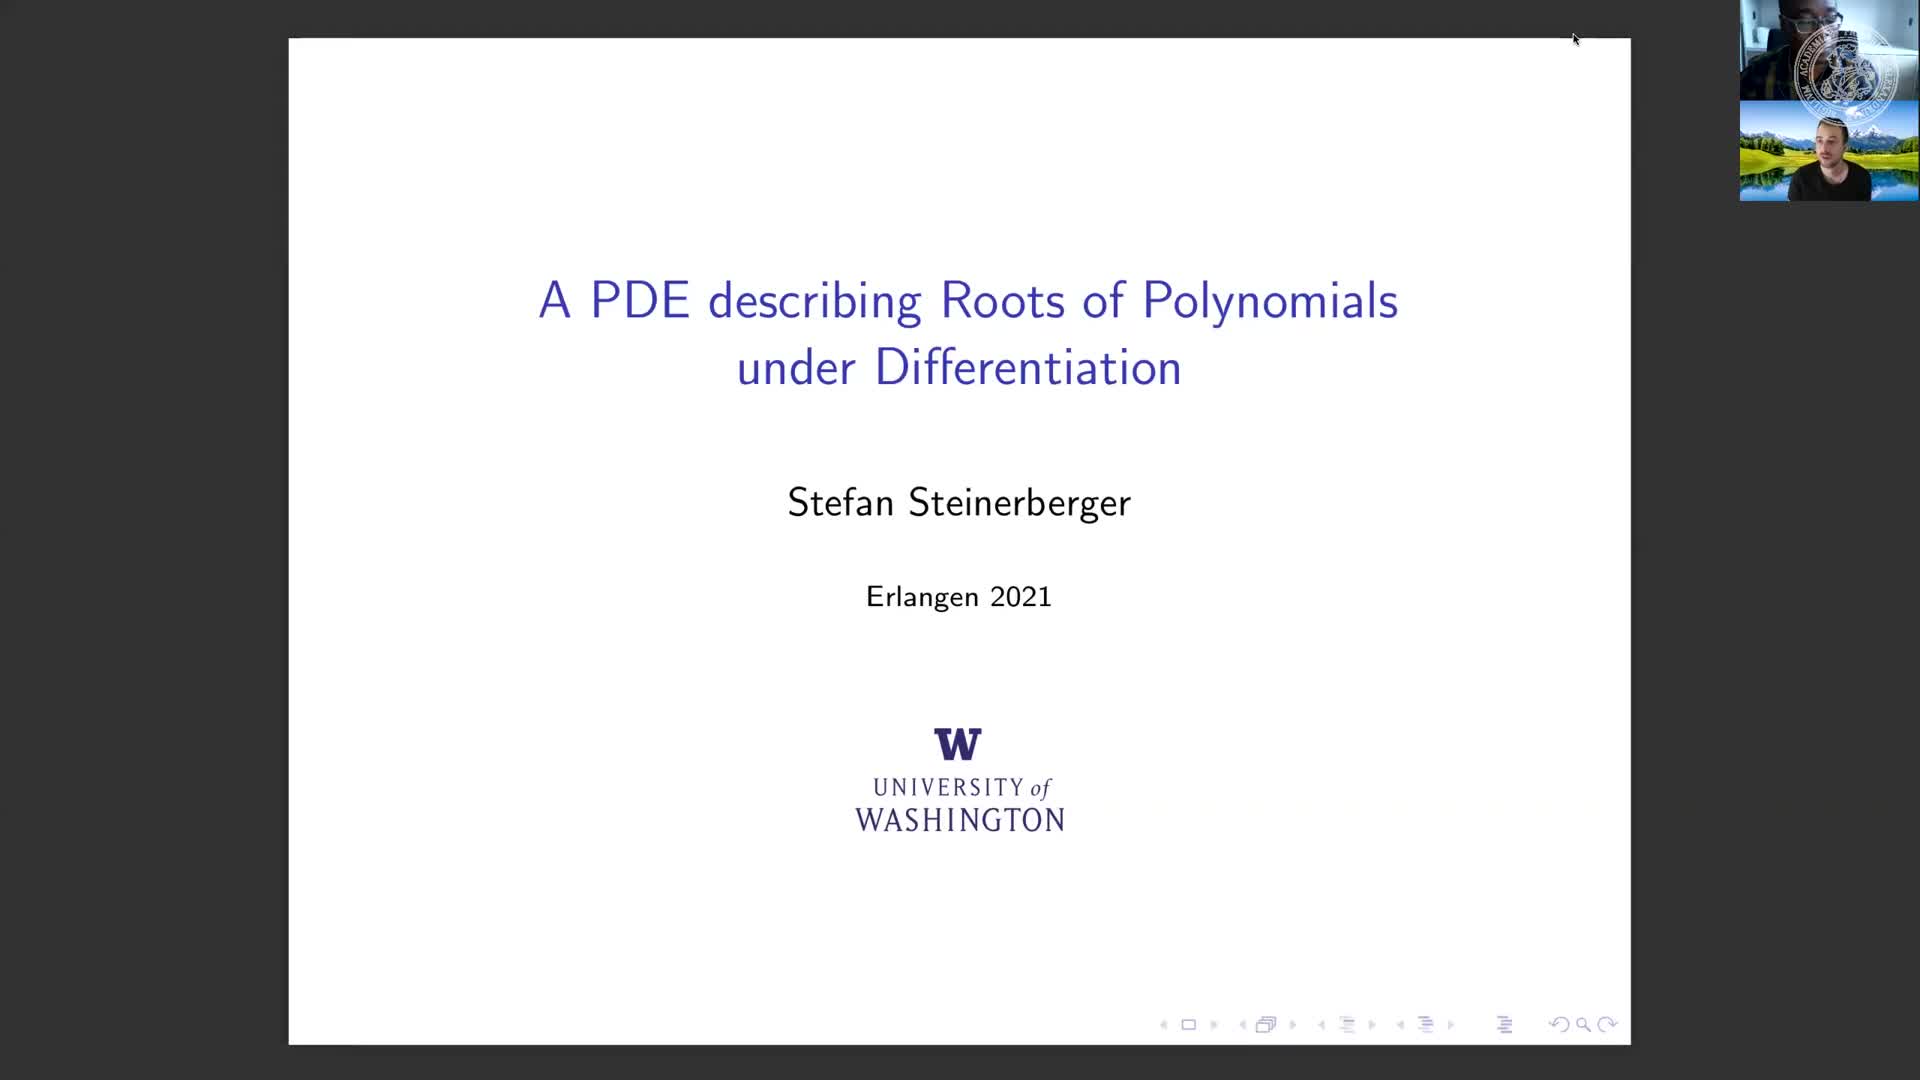 A PDE describing Roots of Polynomials under Differentiation (Stefan Steinerberger, University of Washington) preview image